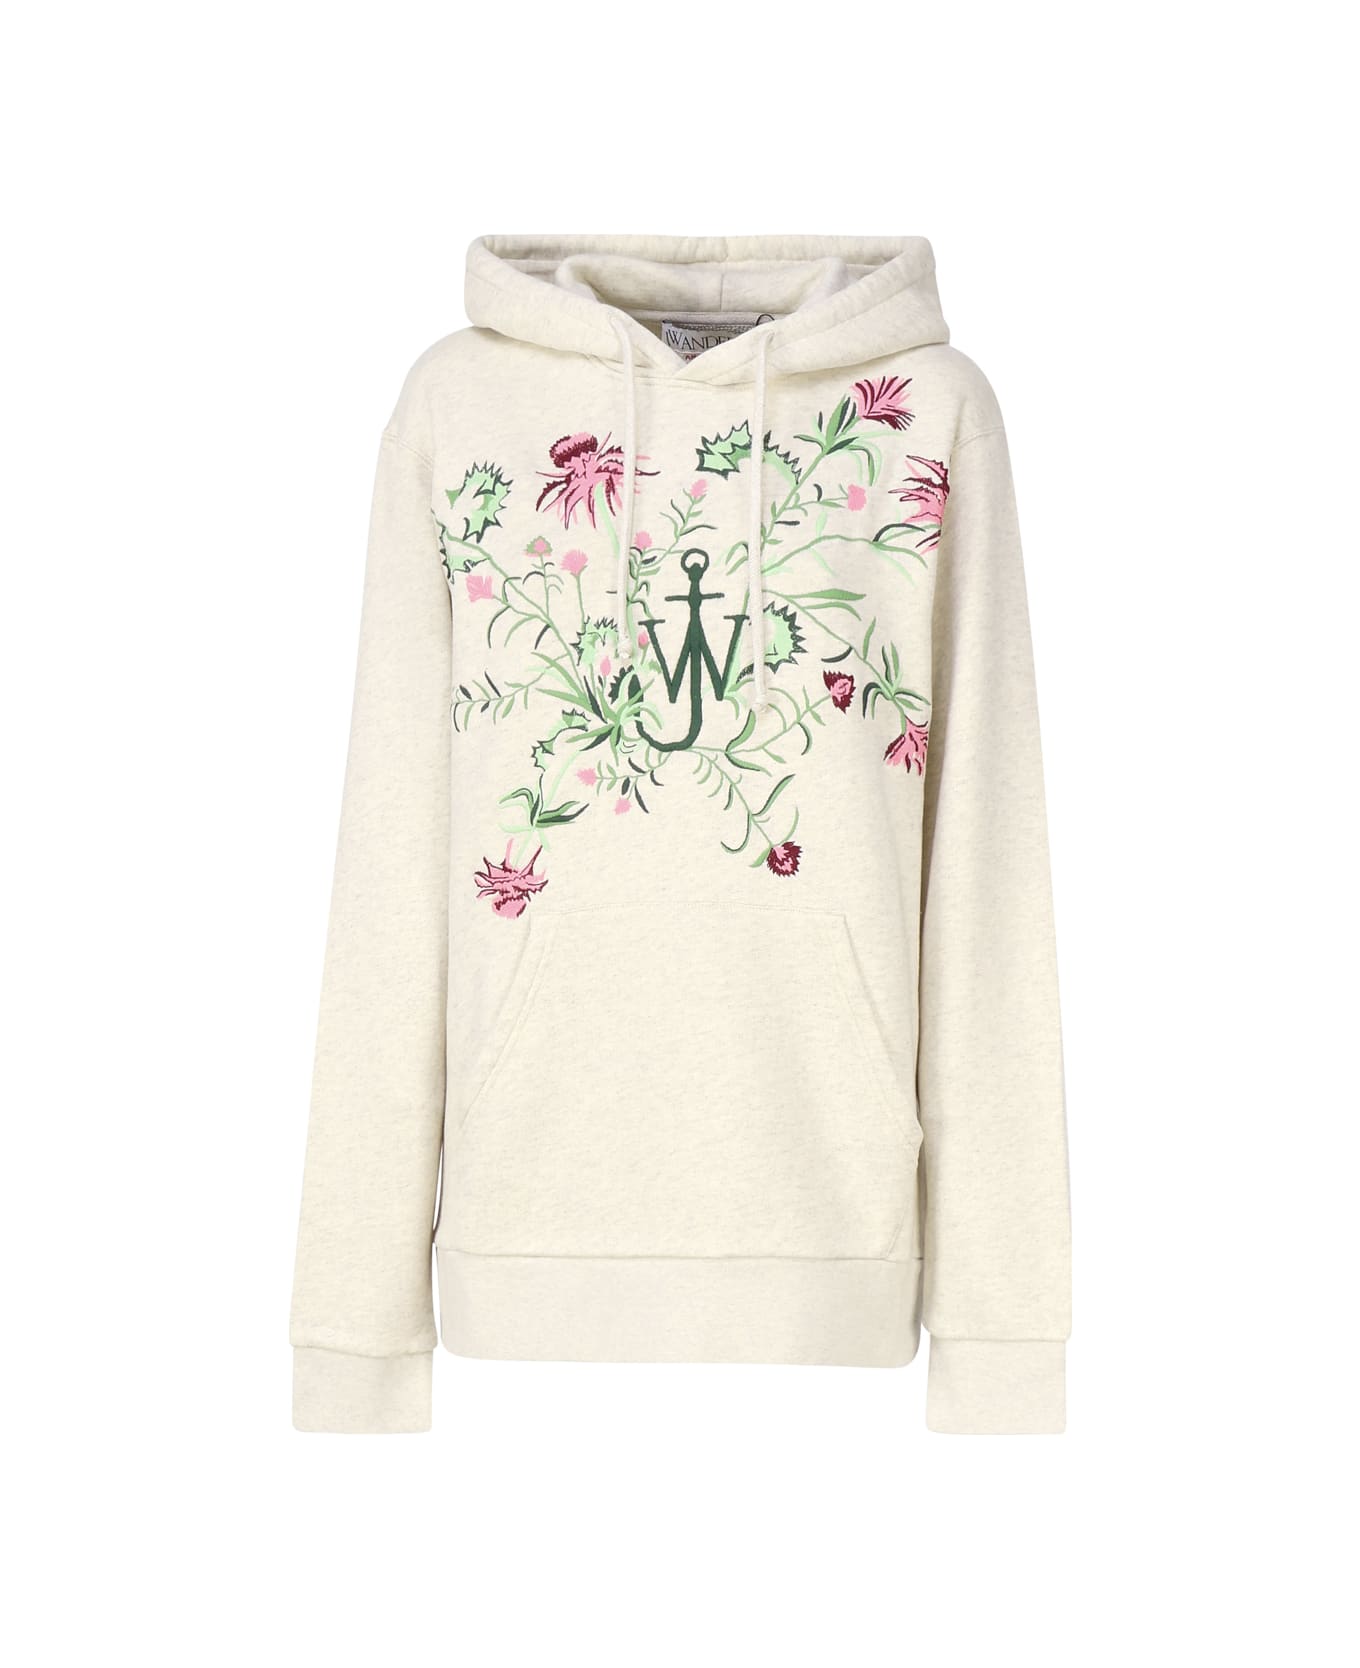 J.W. Anderson Sweatshirt With Embroidery - Beige